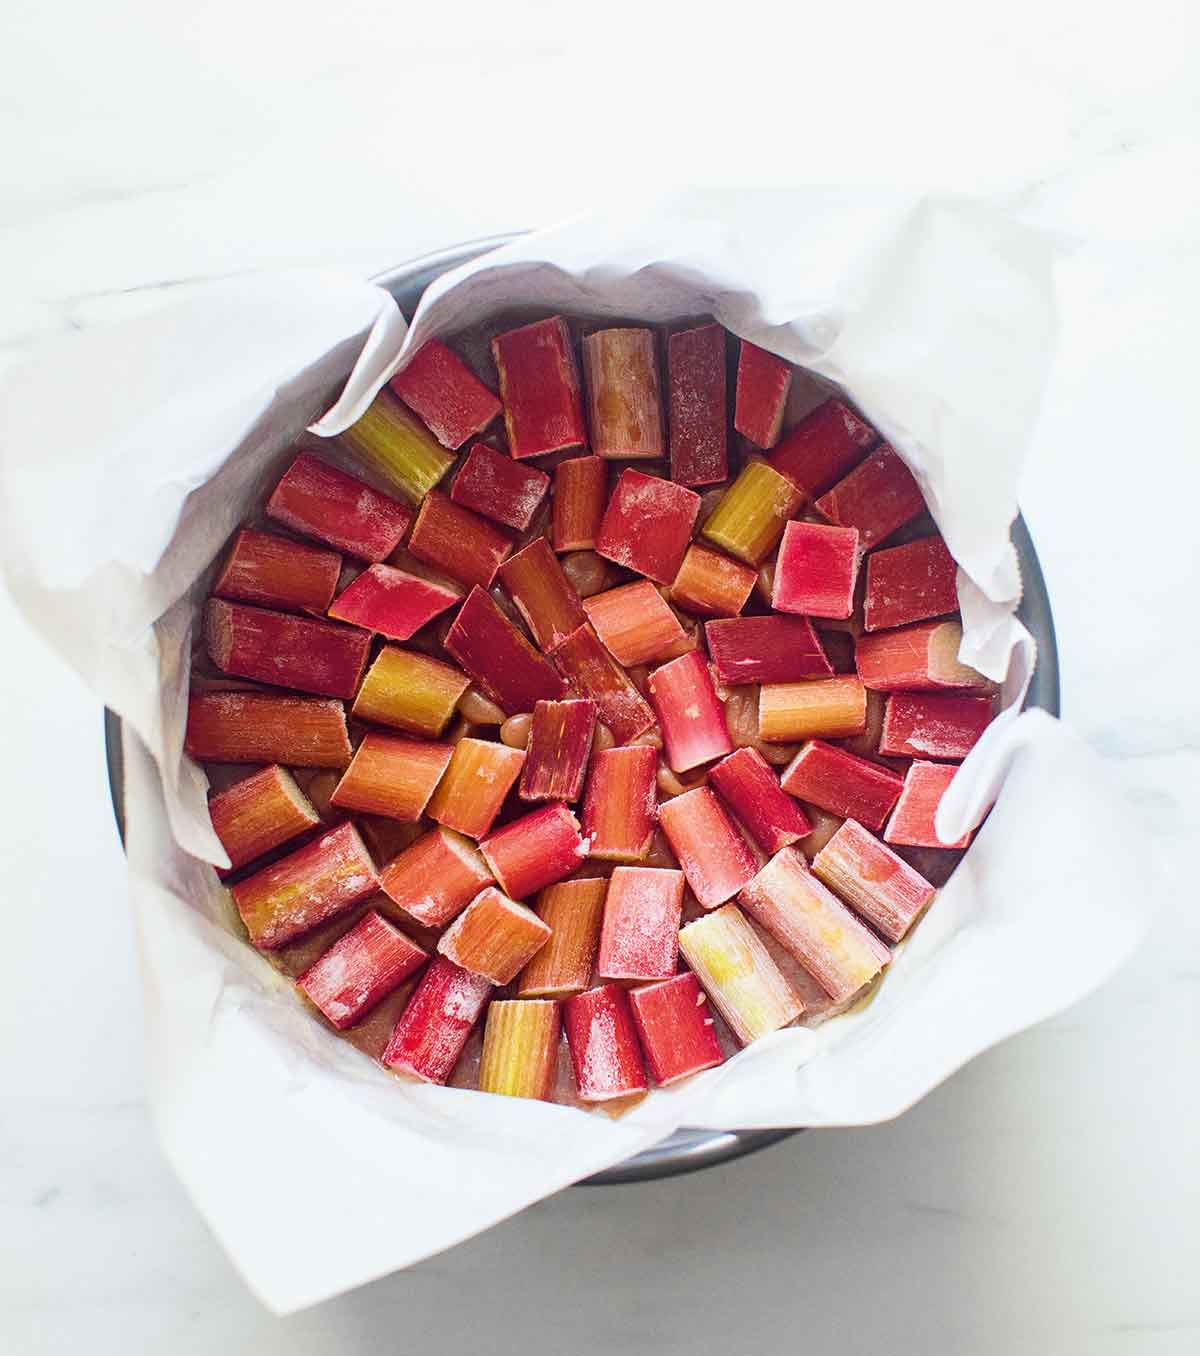 Rhubarb upside-down cake top layer in a Springform pan lined with parchment paper.